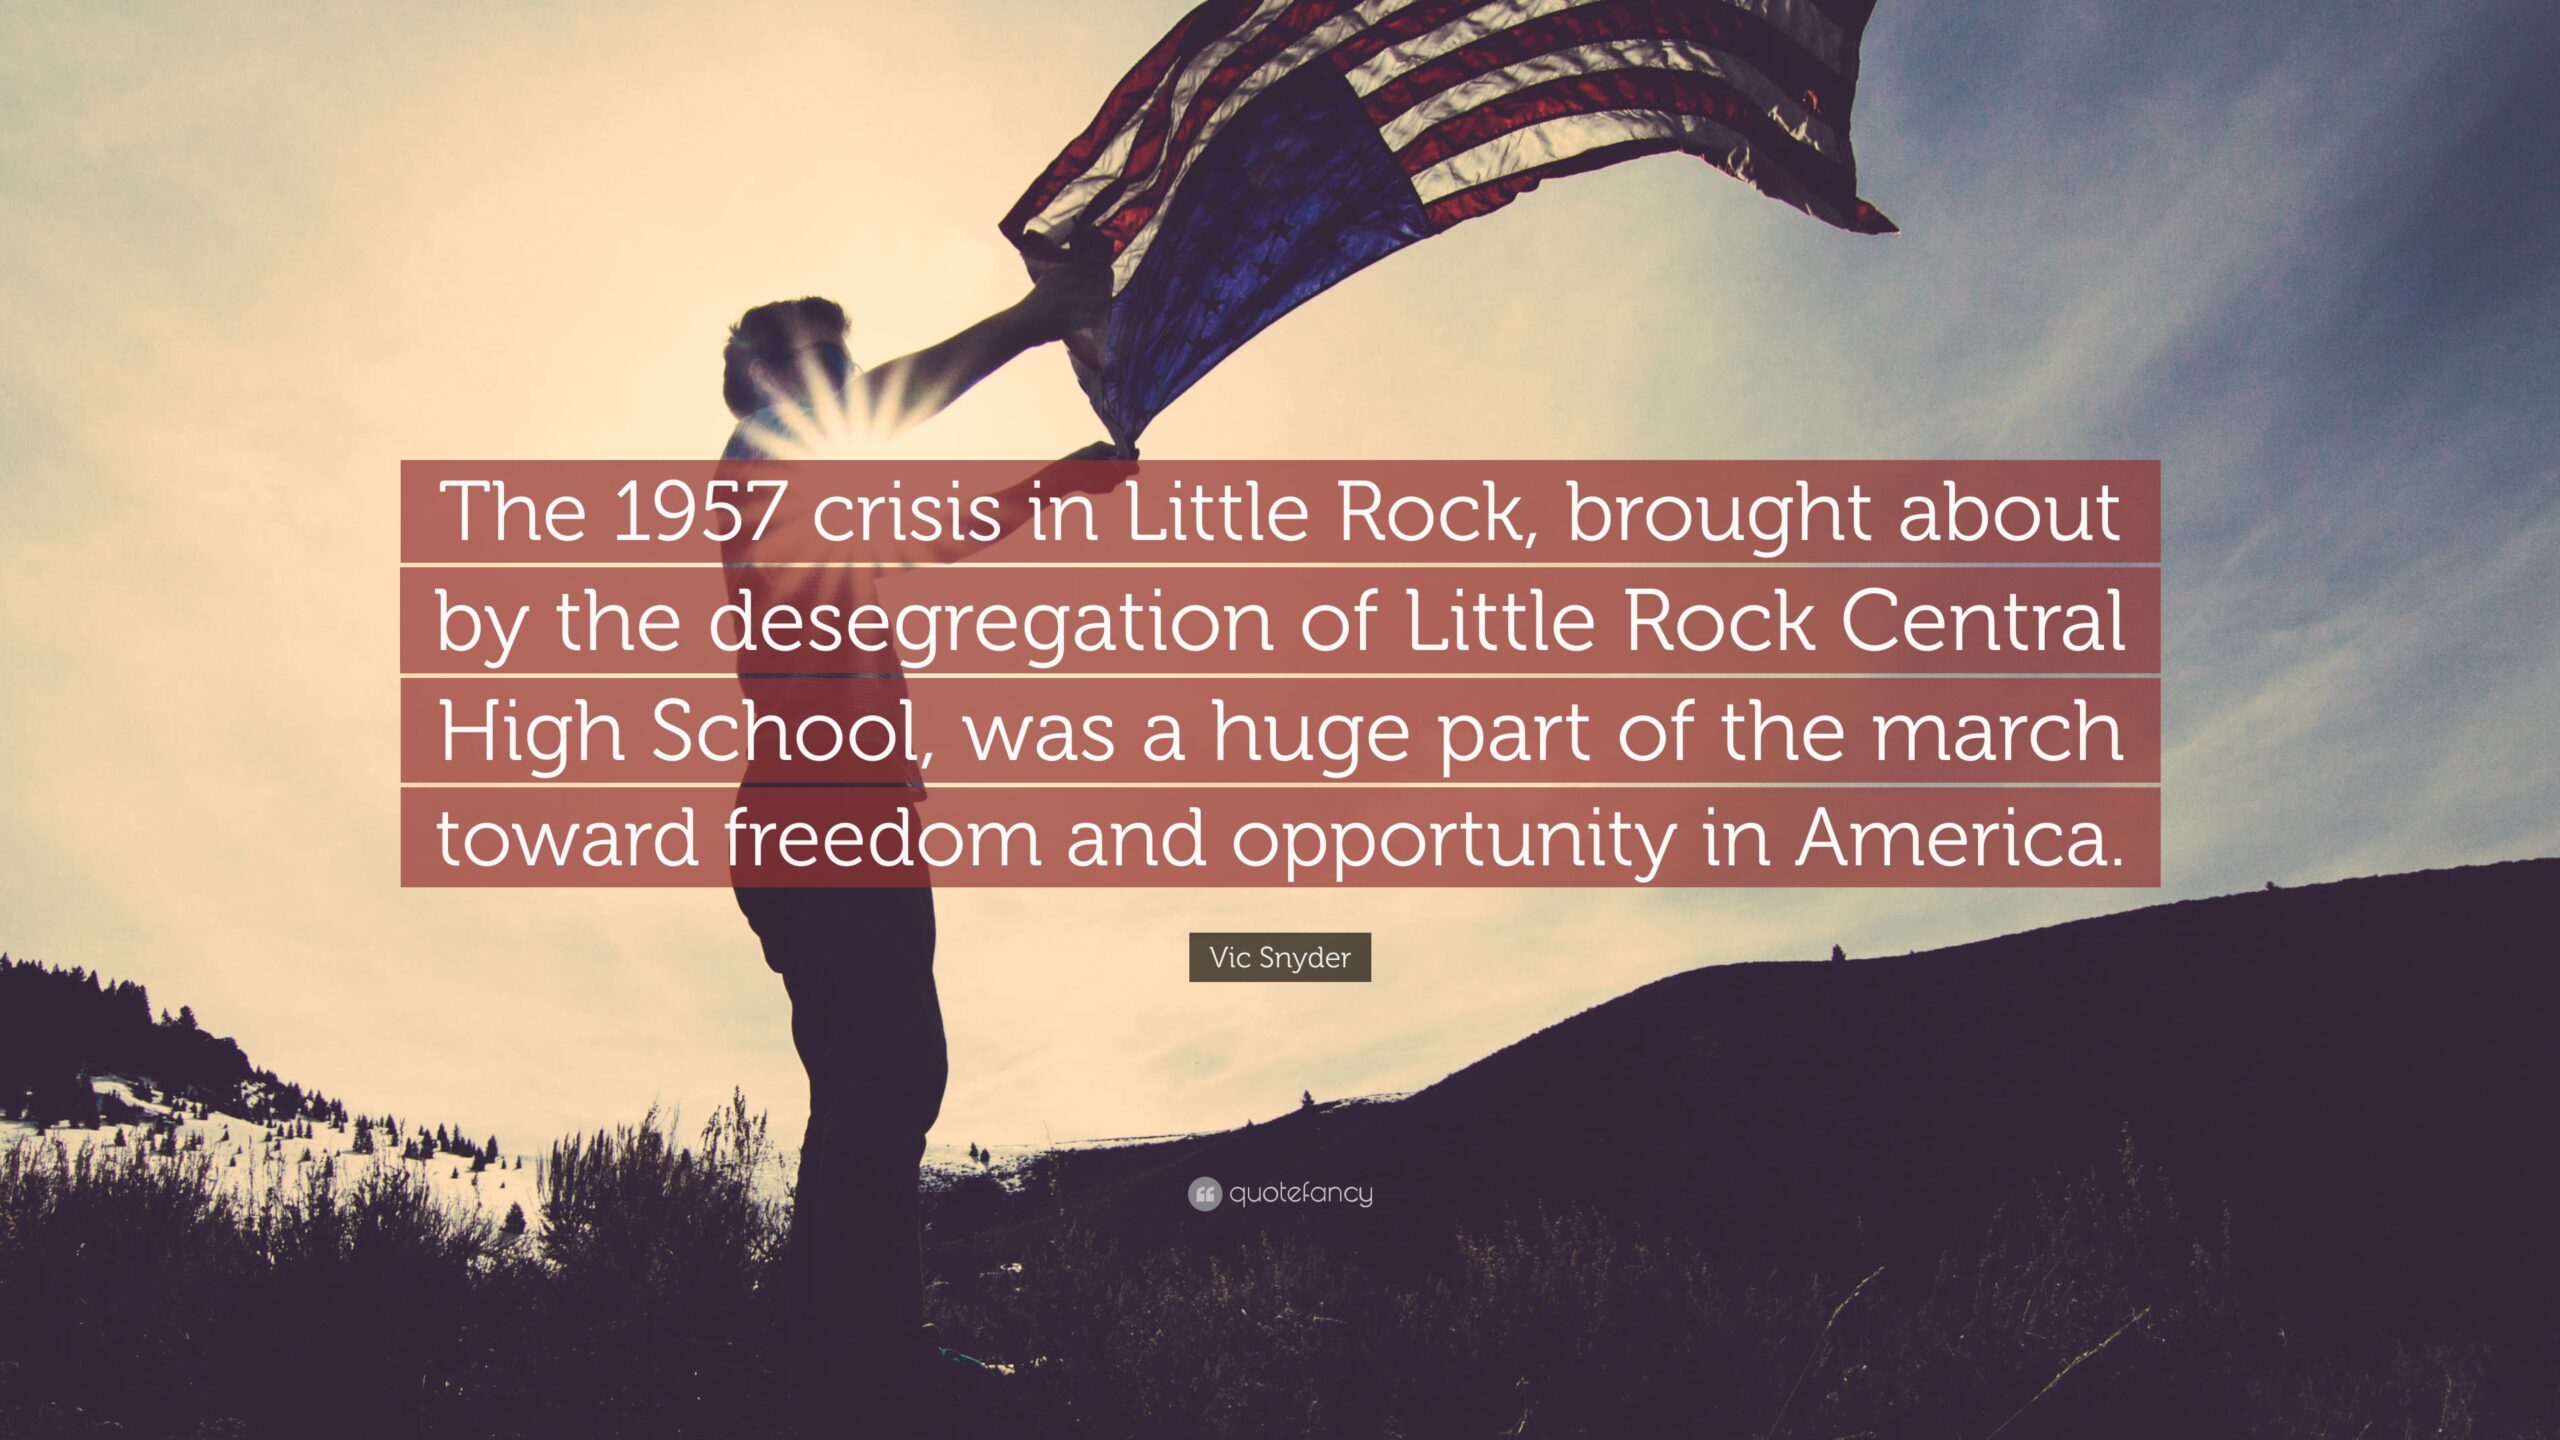 Vic Snyder Quote “The crisis in Little Rock, brought about by